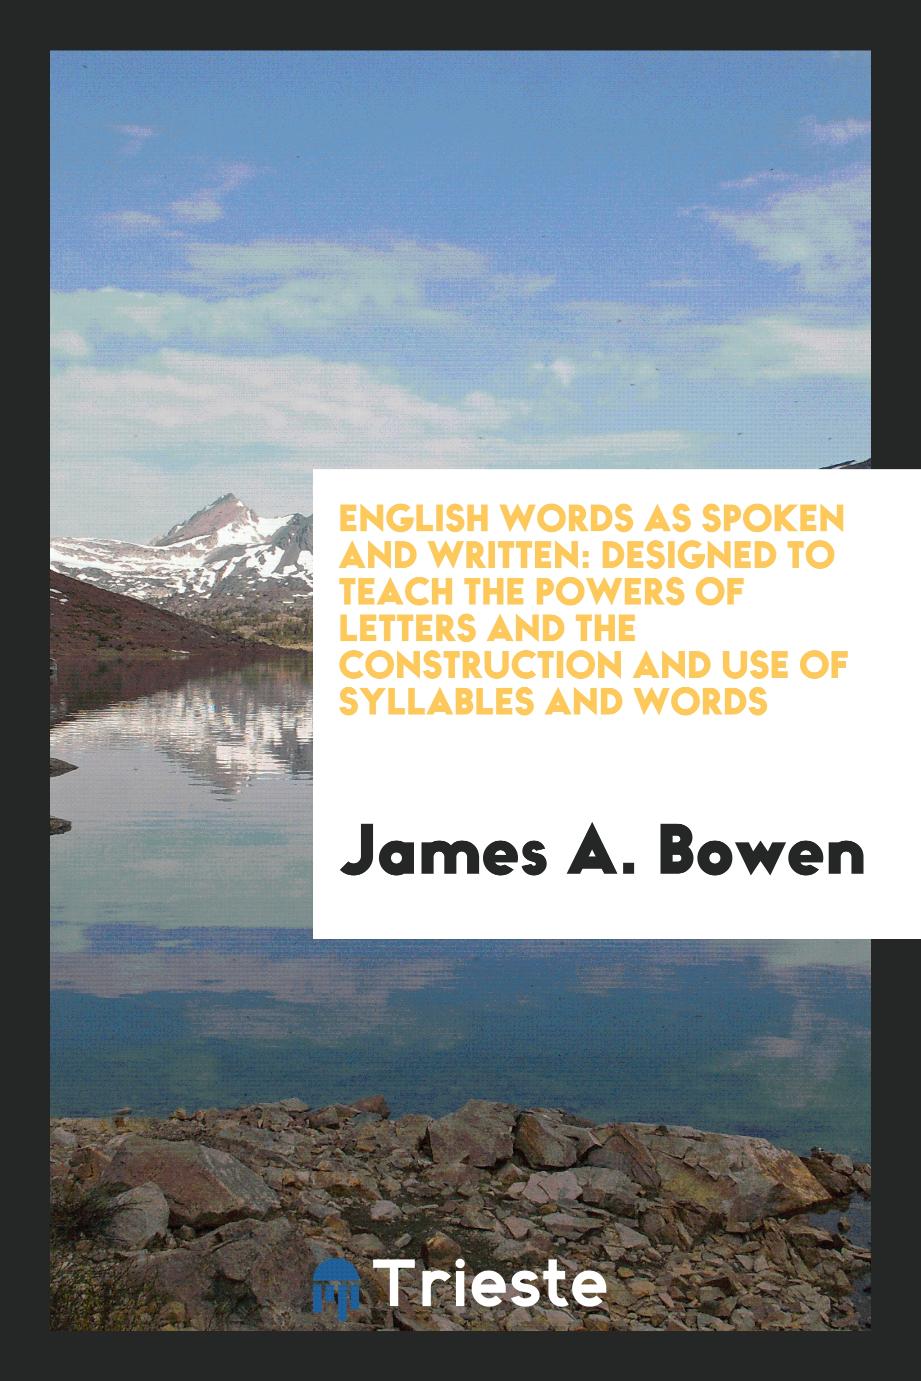 English Words as Spoken and Written: Designed to Teach the Powers of Letters and the Construction and Use of Syllables and Words